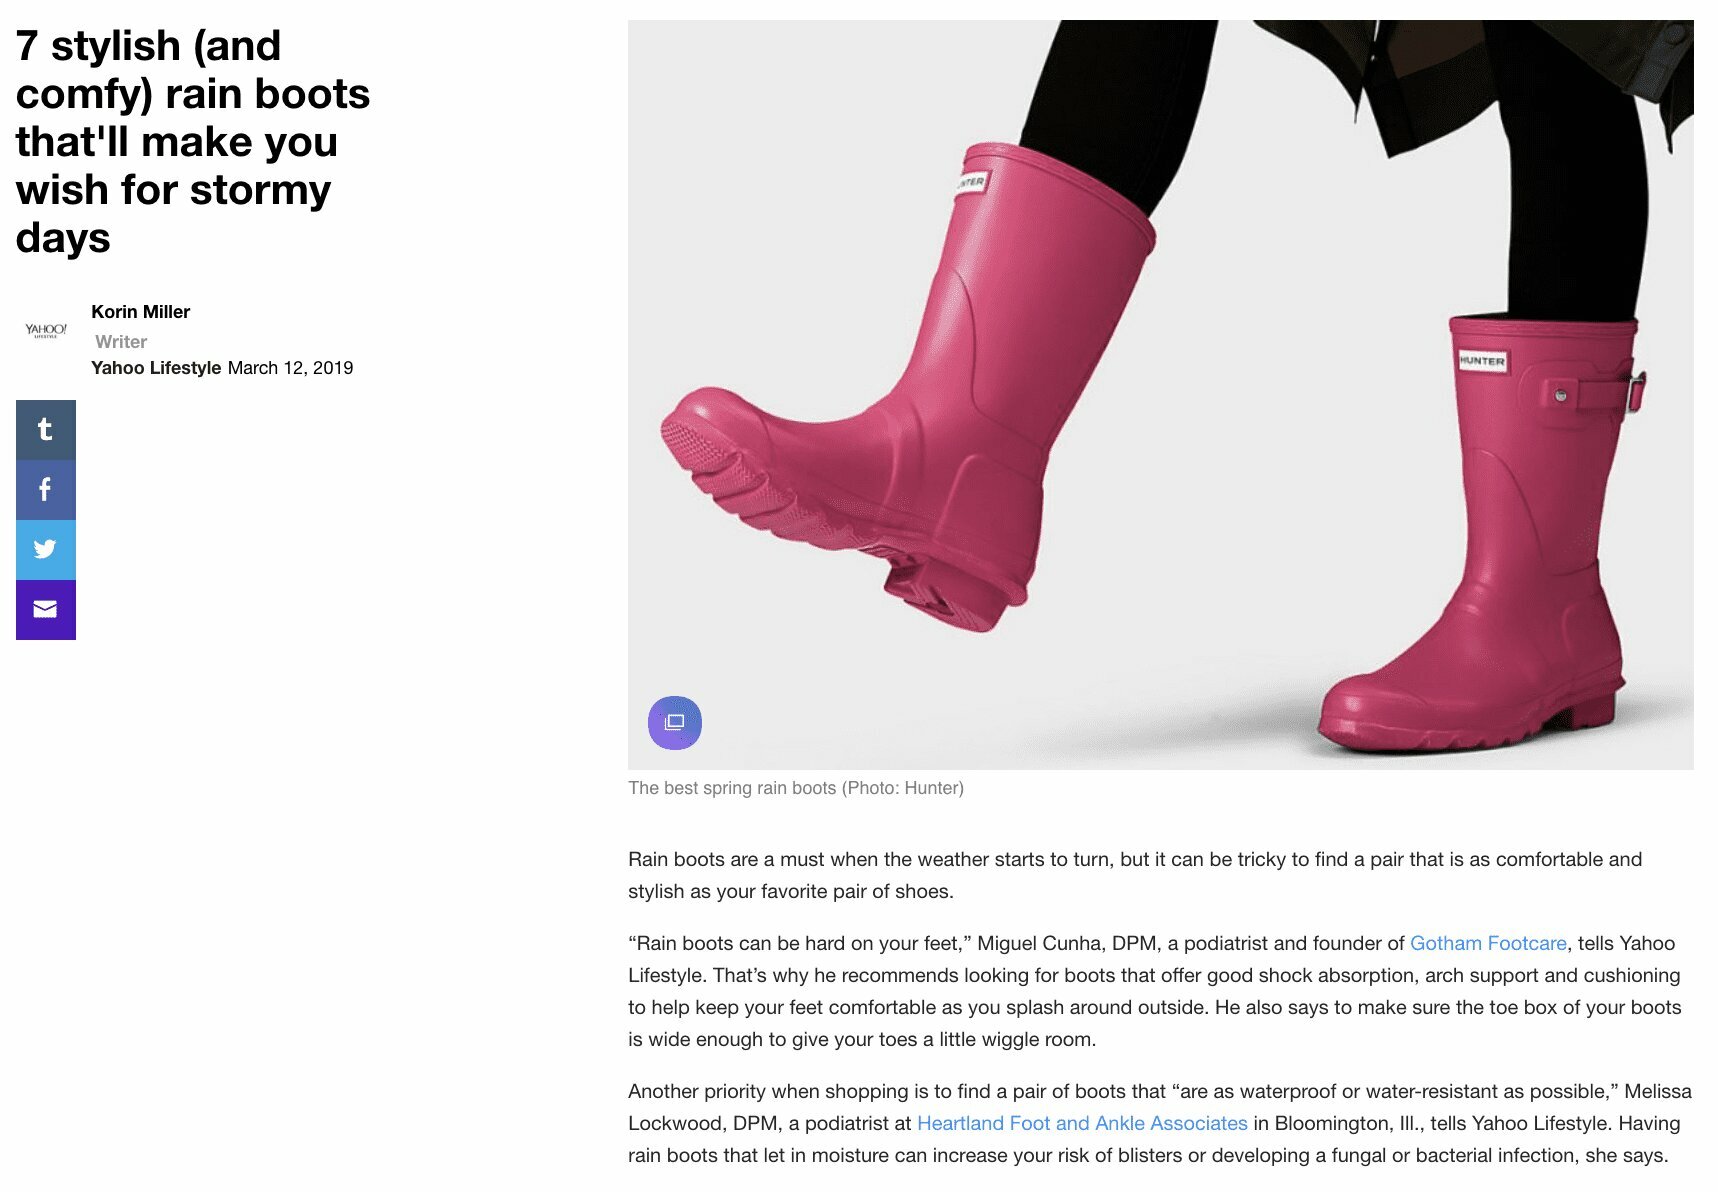 Dr. Cunha Tells Yahoo! Finance How To Find The Best Rain Boots